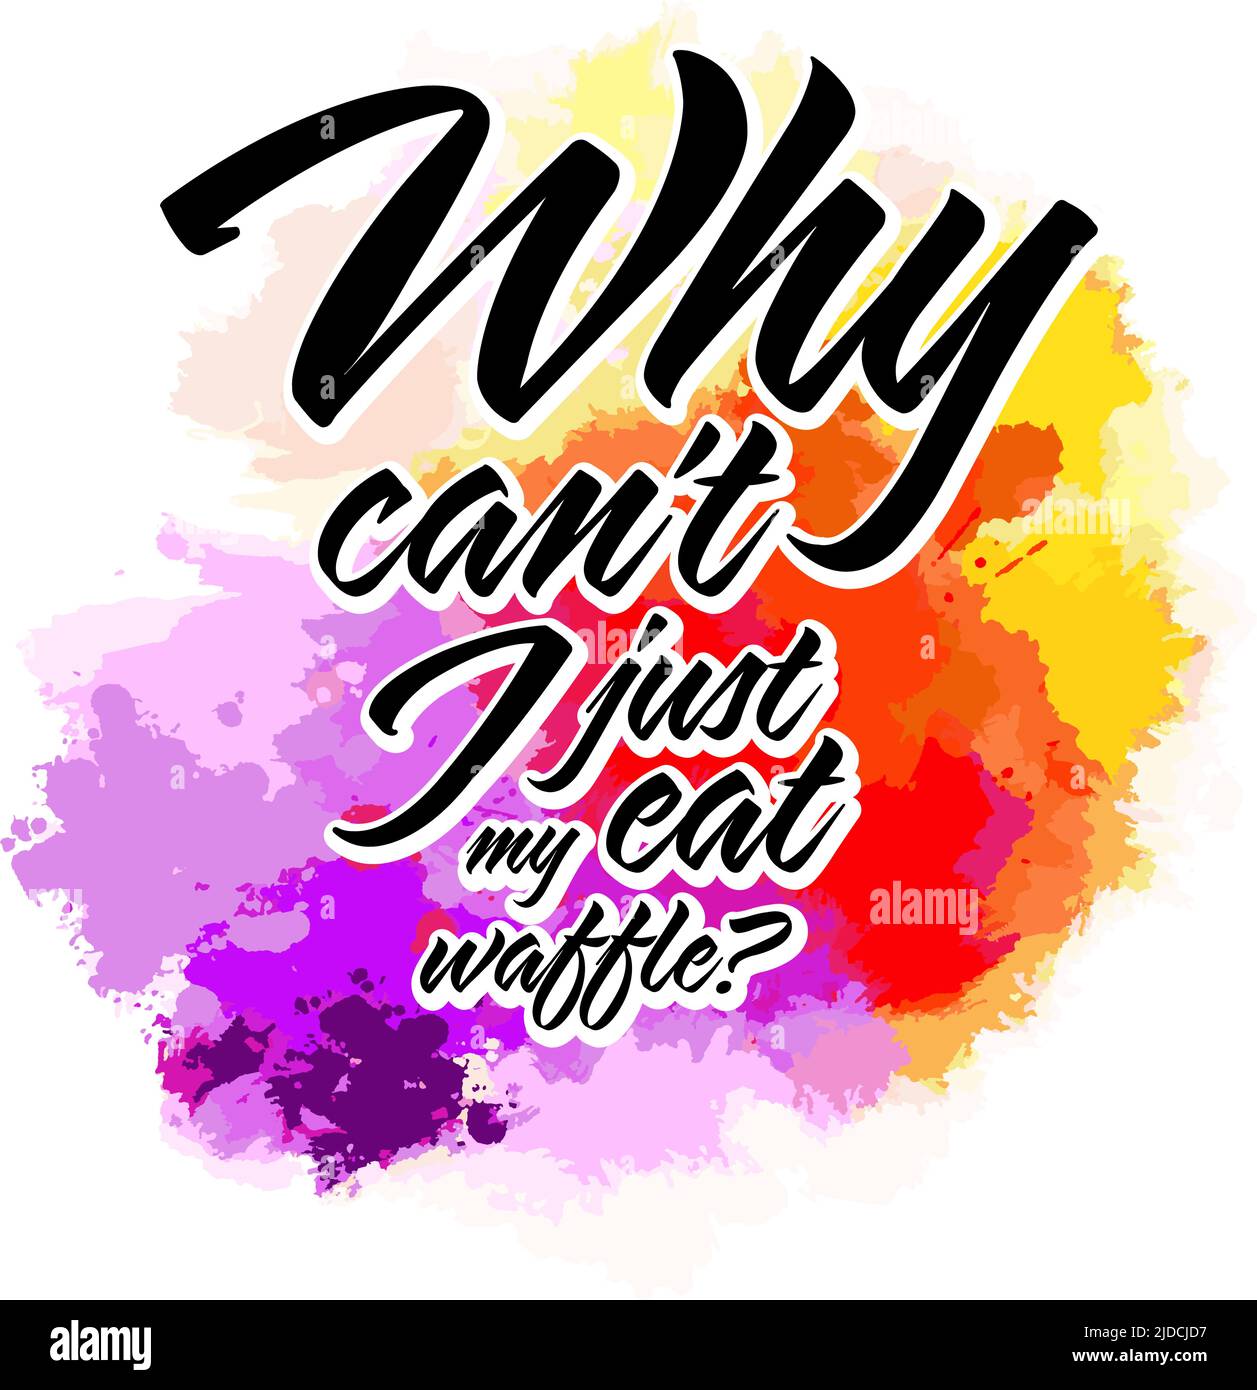 Why Cant I Just Eat My Waffle?. Lettering Design Vector art for print design. Stock Vector